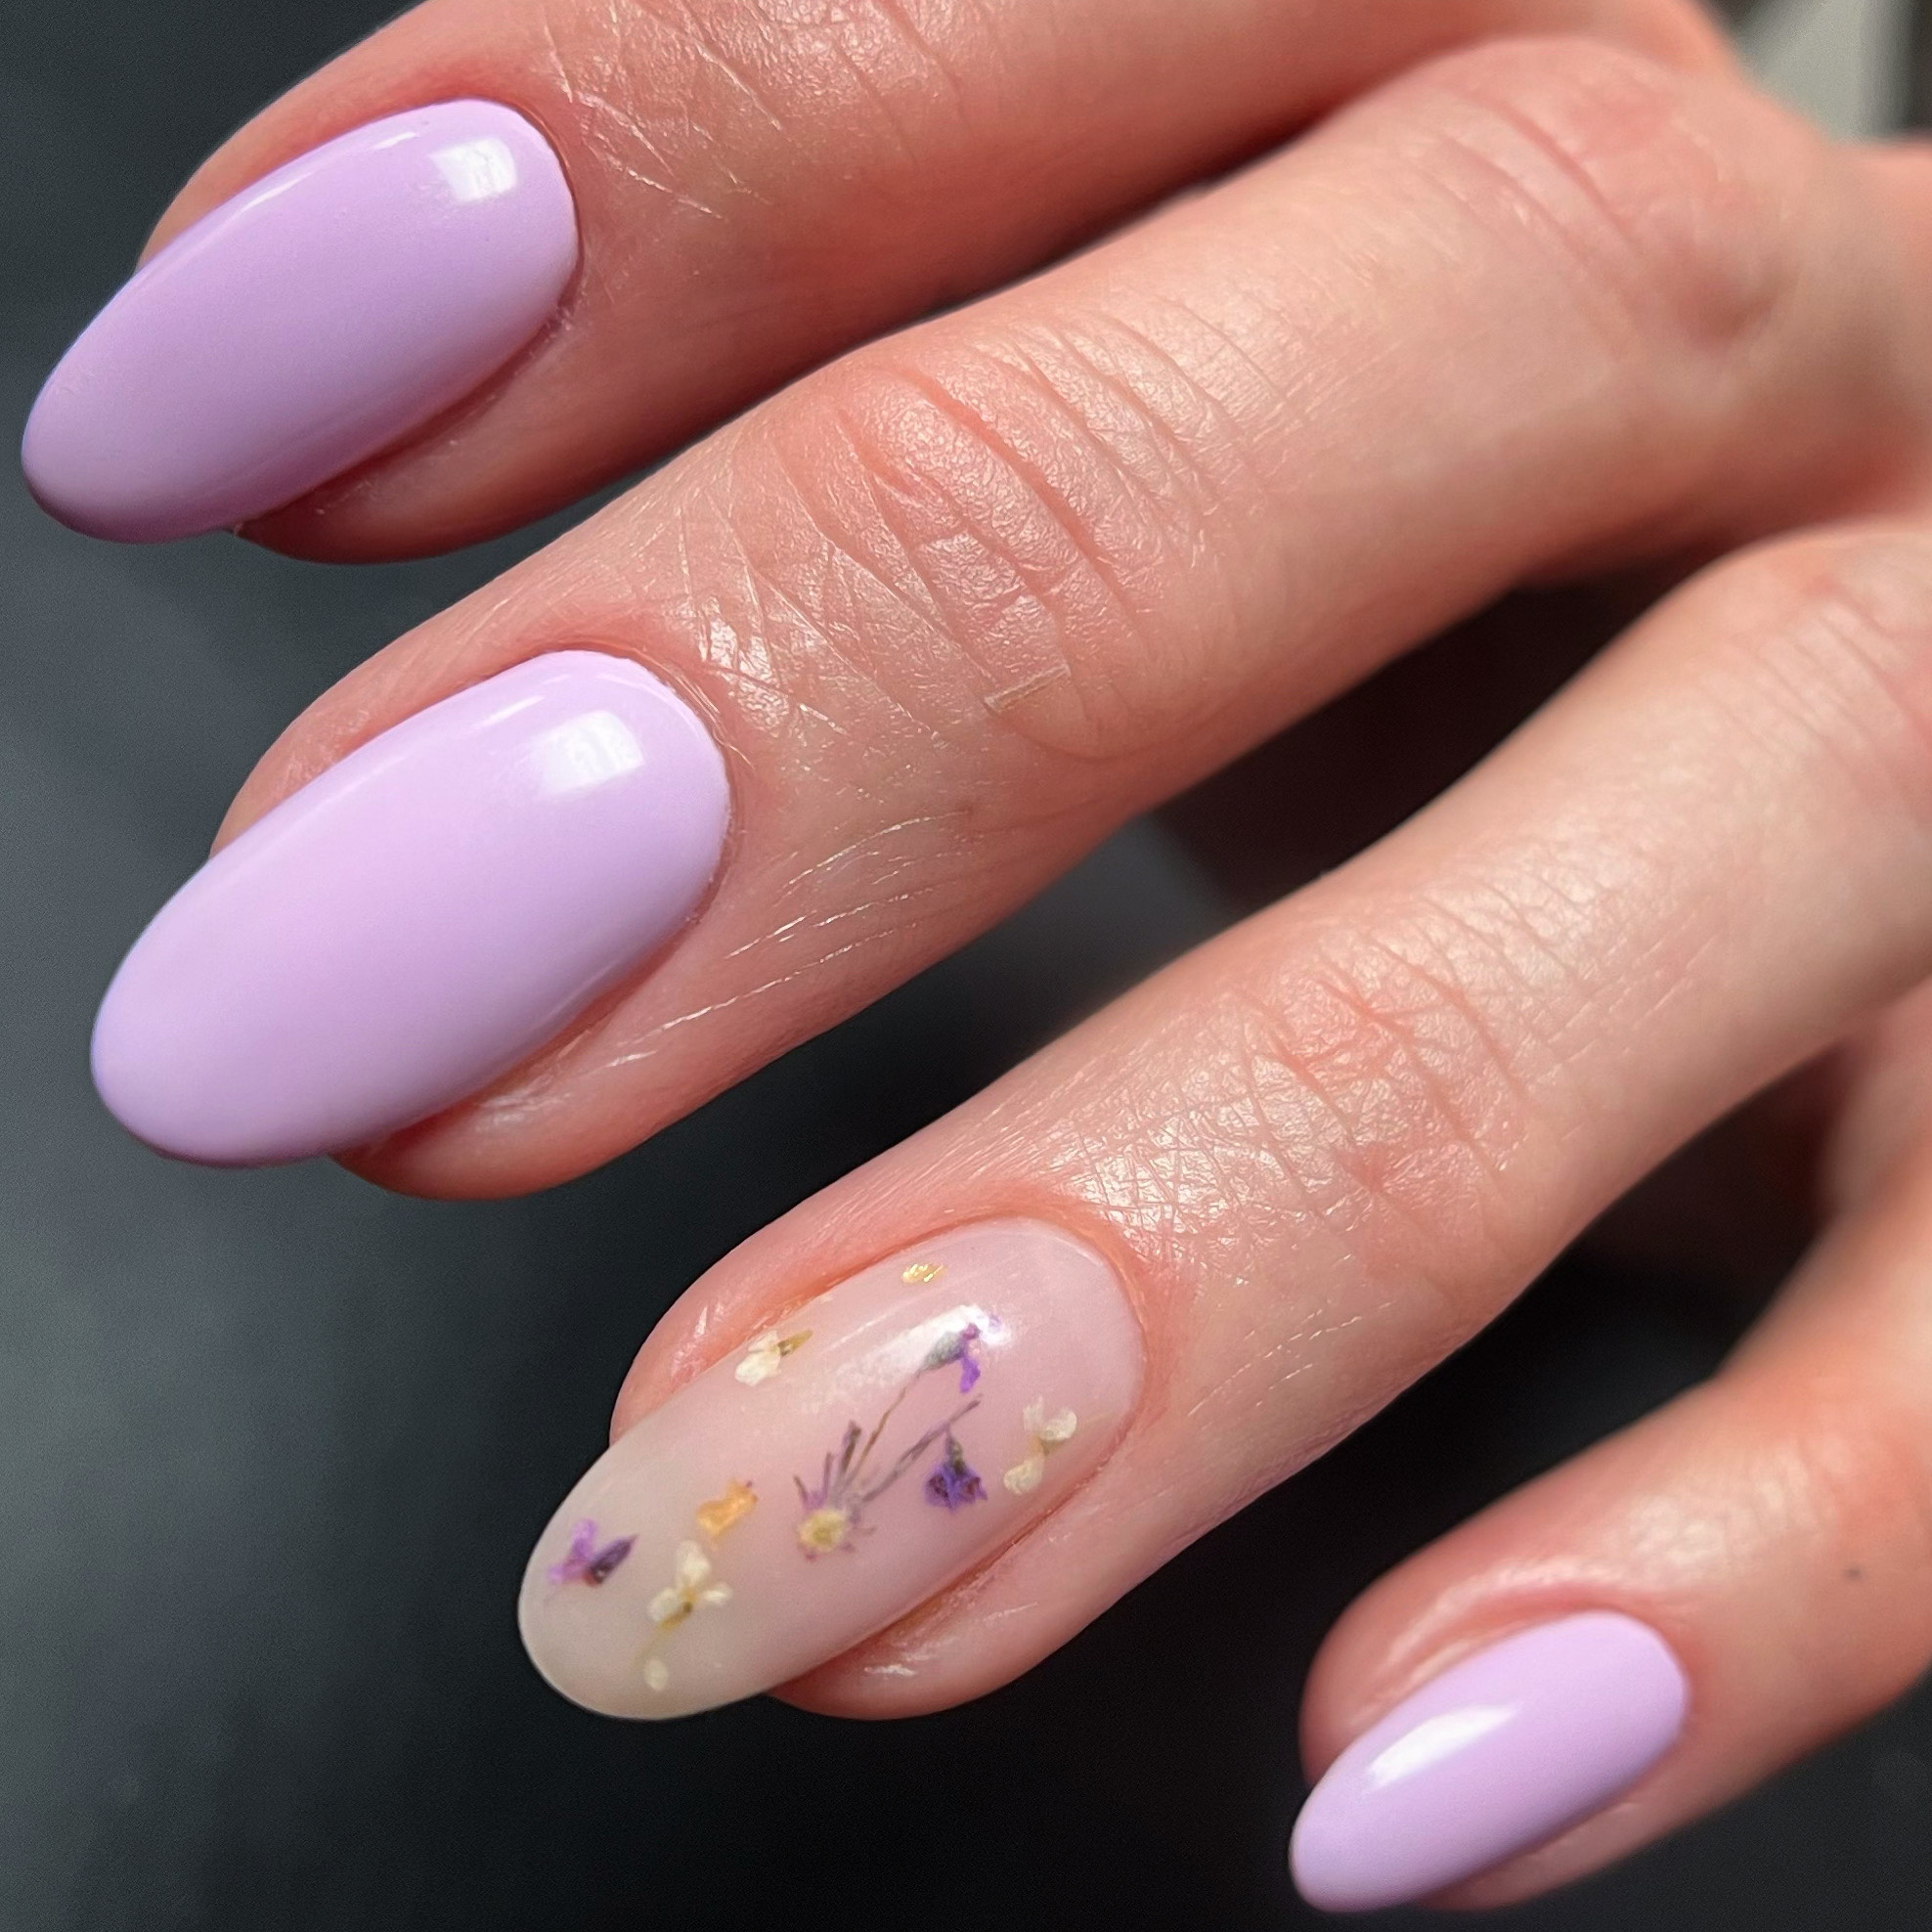 Close-up of a hand with purple manicured nails, one nail featuring a floral design